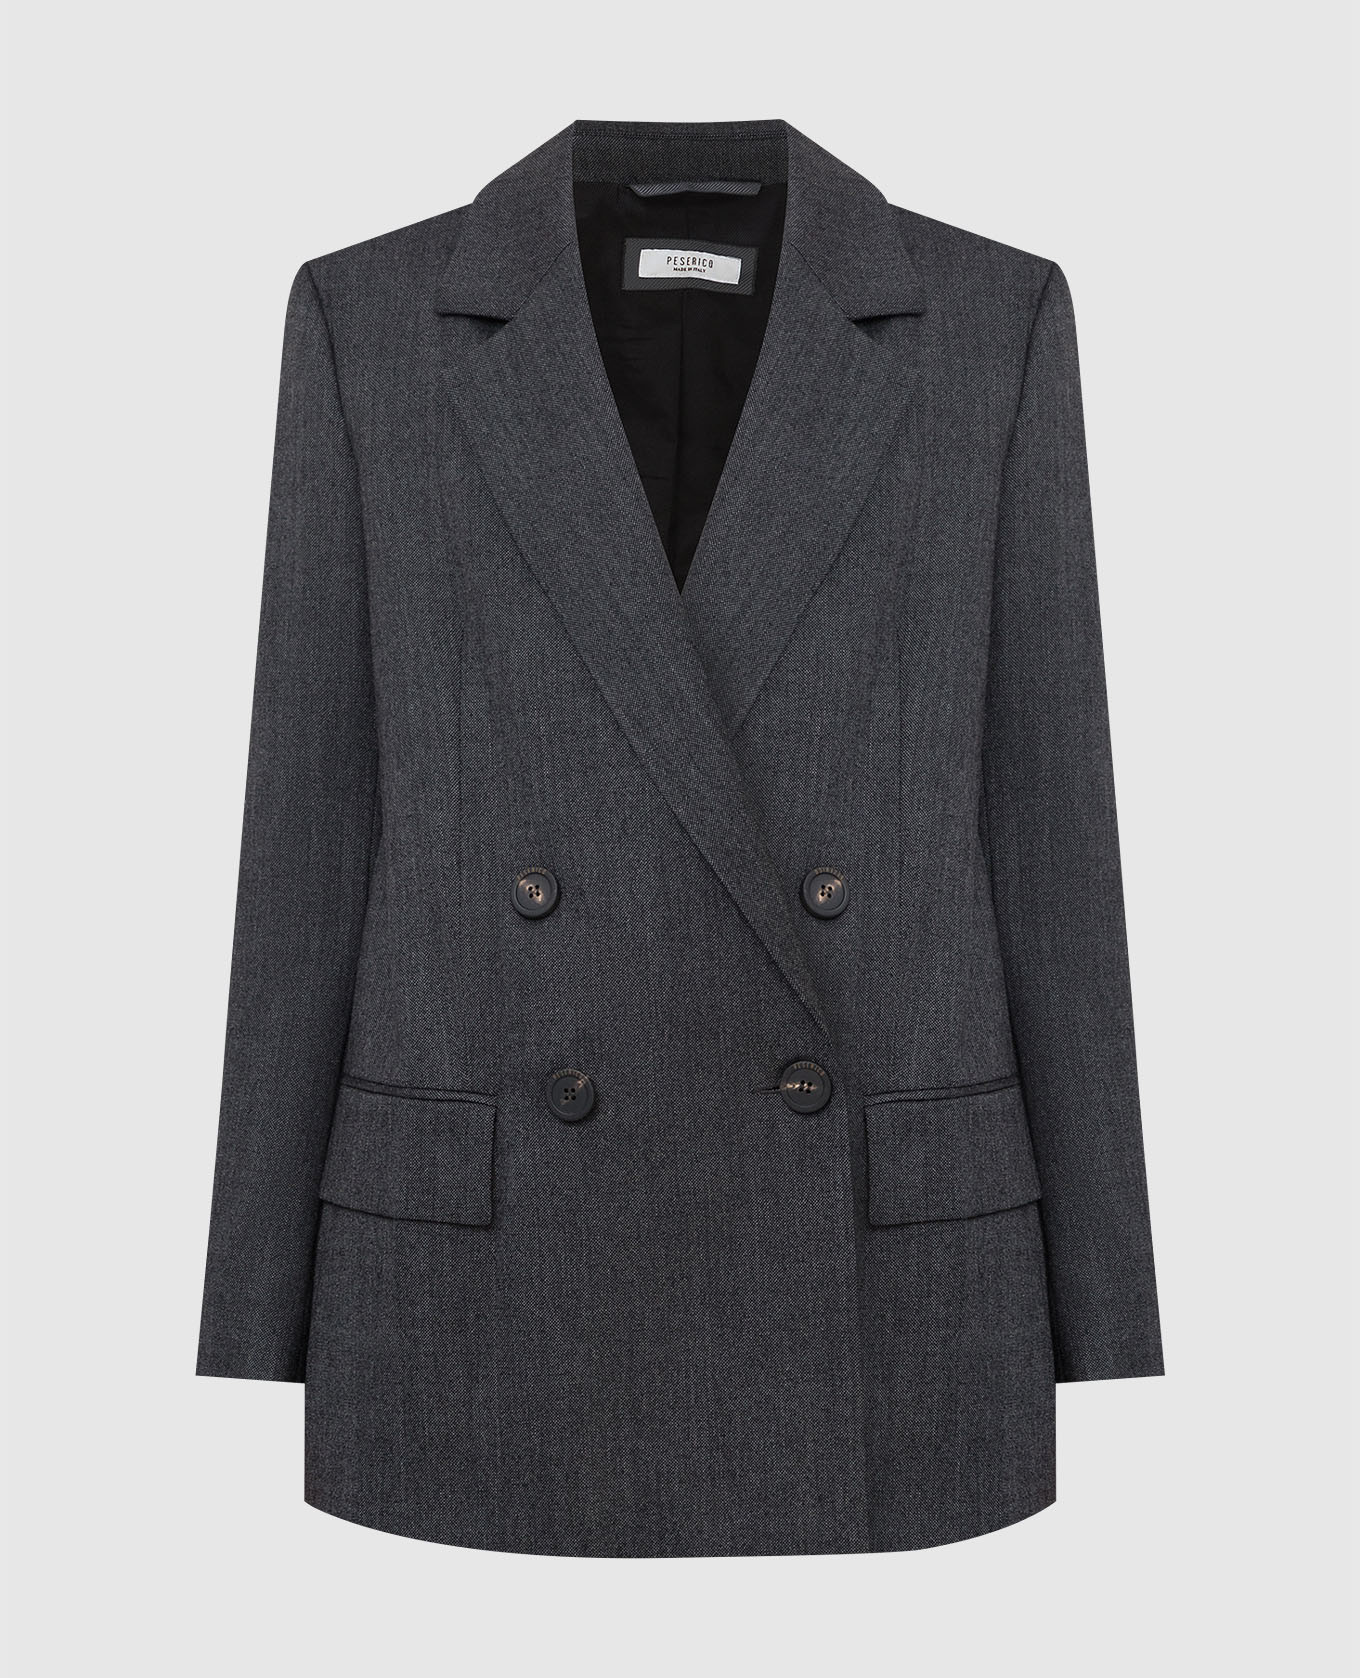 Charcoal wool double-breasted jacket